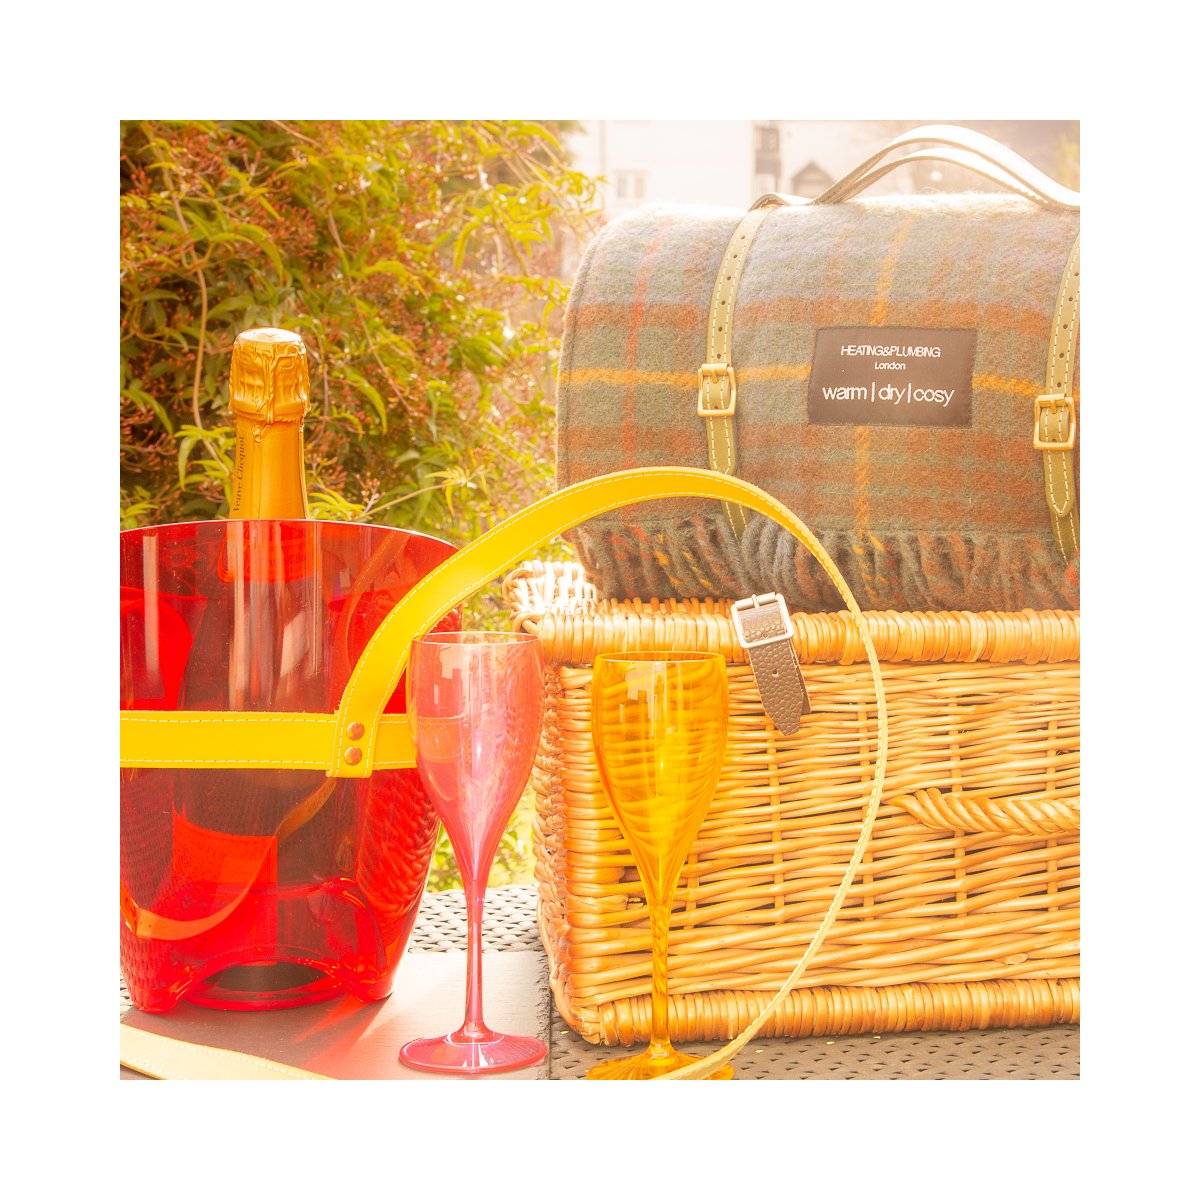 Champagne picnic in the garden anyone?  

heating-and-plumbing.com

#instachampagne #ilovechampagne #winelover #champagneflutes #luxurylifestyle #blanket #outdoorliving #madeinbritain #gardenblanket #outdoorblanket #gardenblanket #waterproofblanket #wool #woolblanket